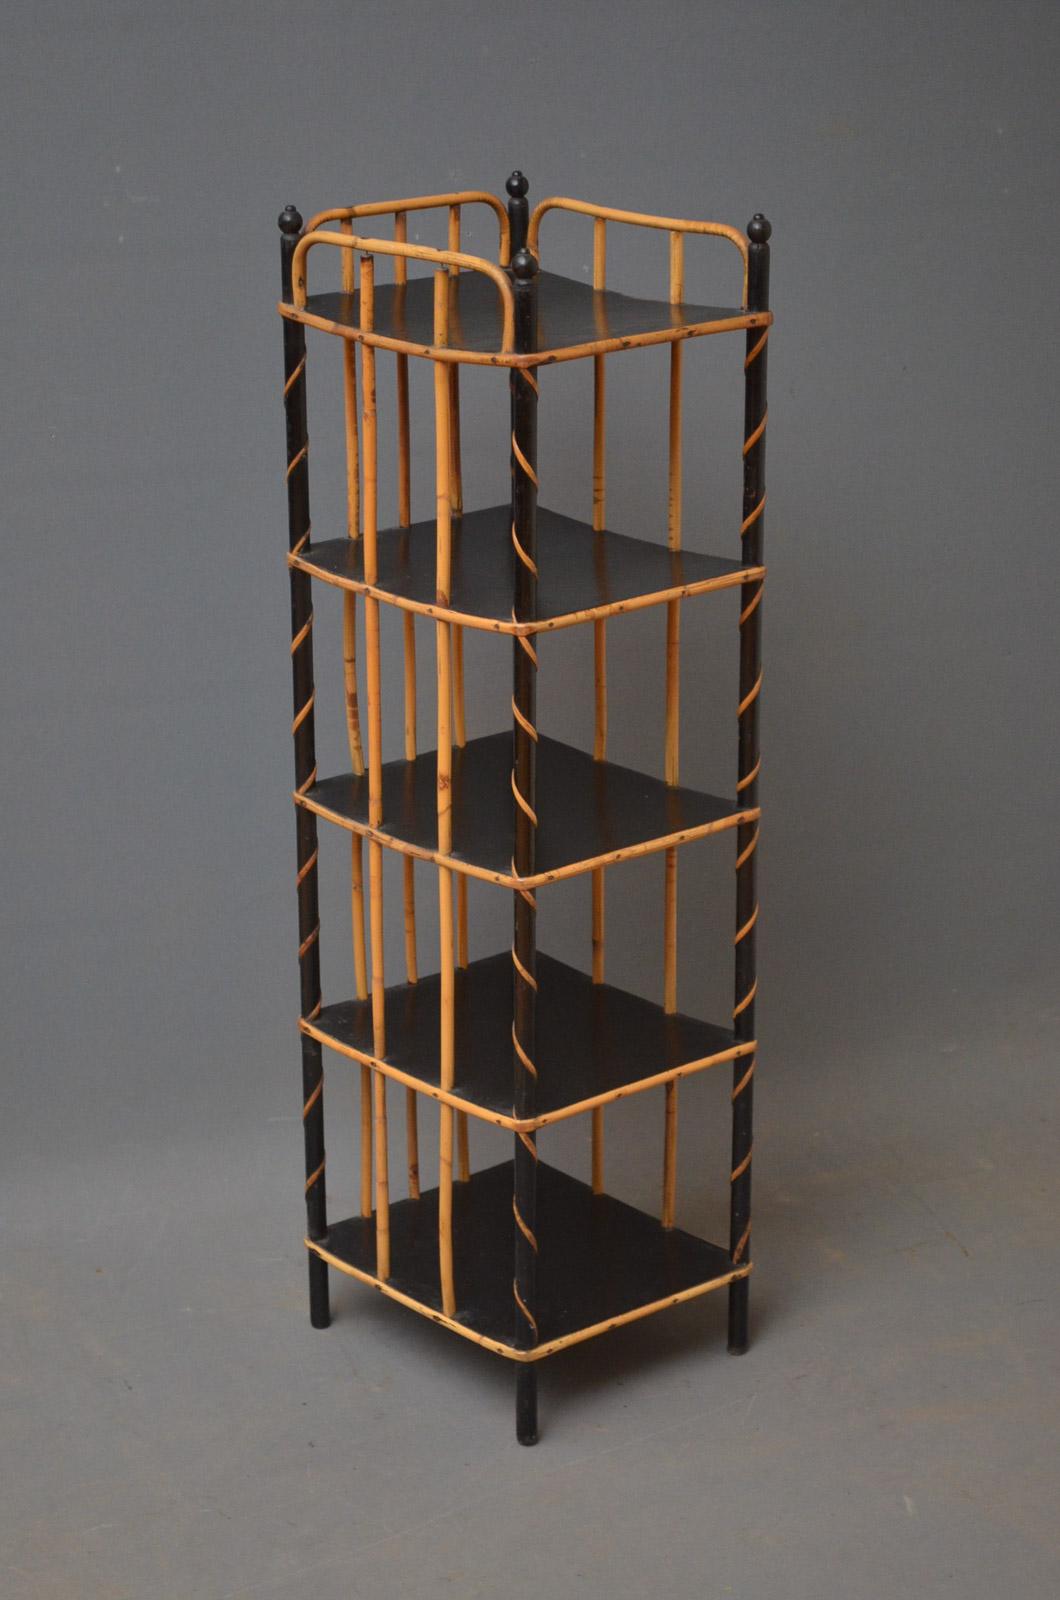 Sn3187 Turn of the century shoe rack with 5 tiers and slatted sides - ready to place at home, circa 1910.
H36.5